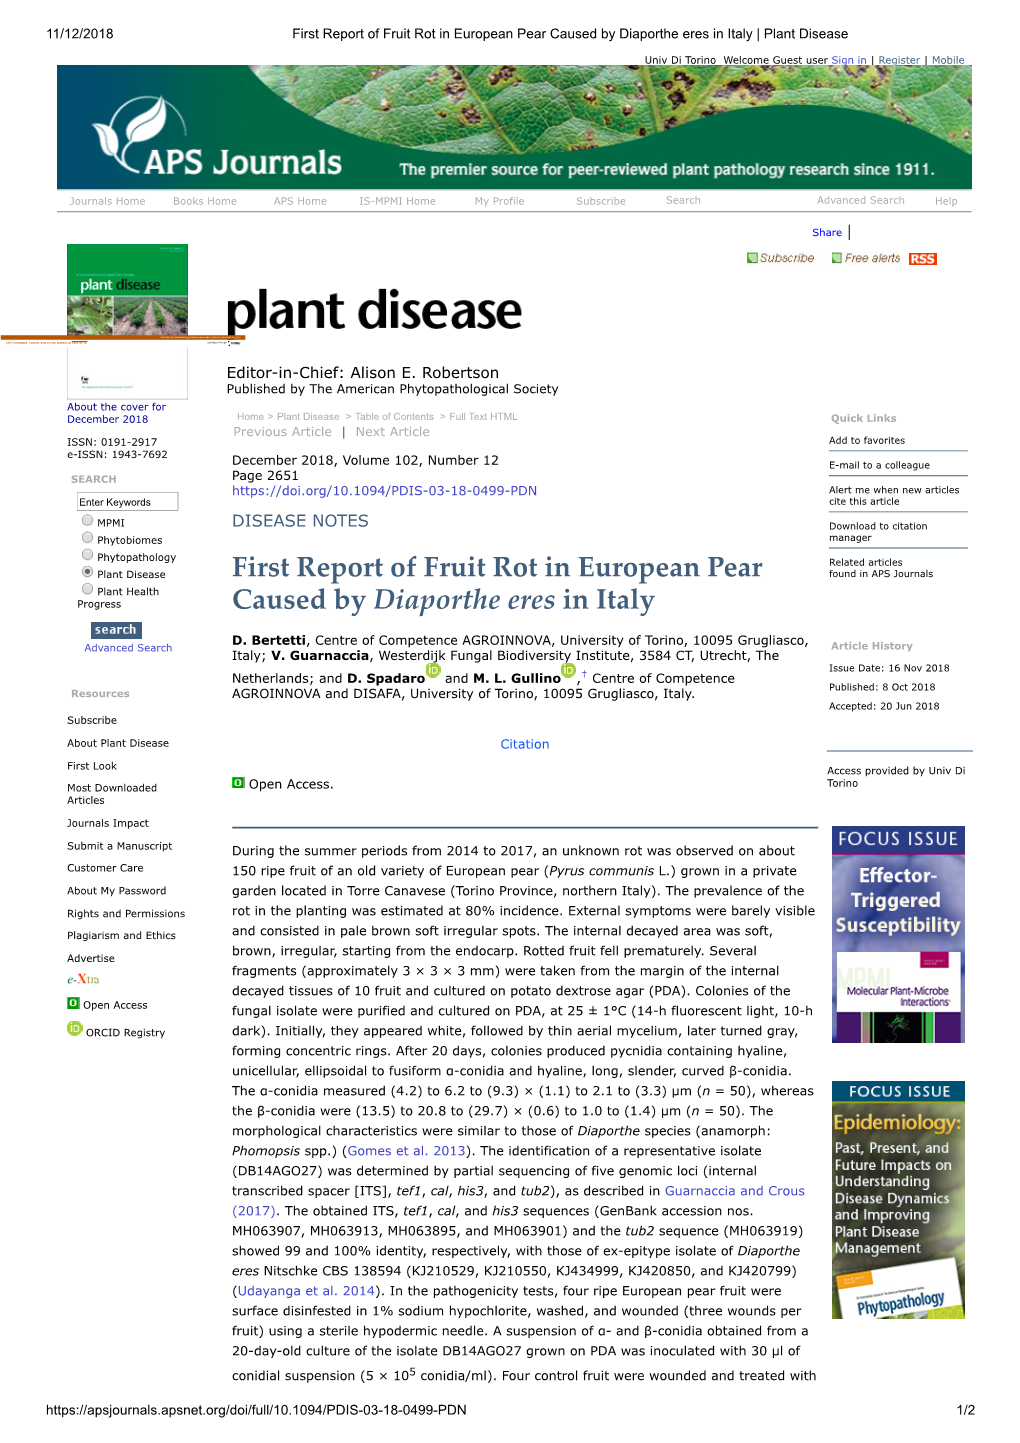 First Report of Fruit Rot in European Pear Caused by Diaporthe Eres in Italy | Plant Disease